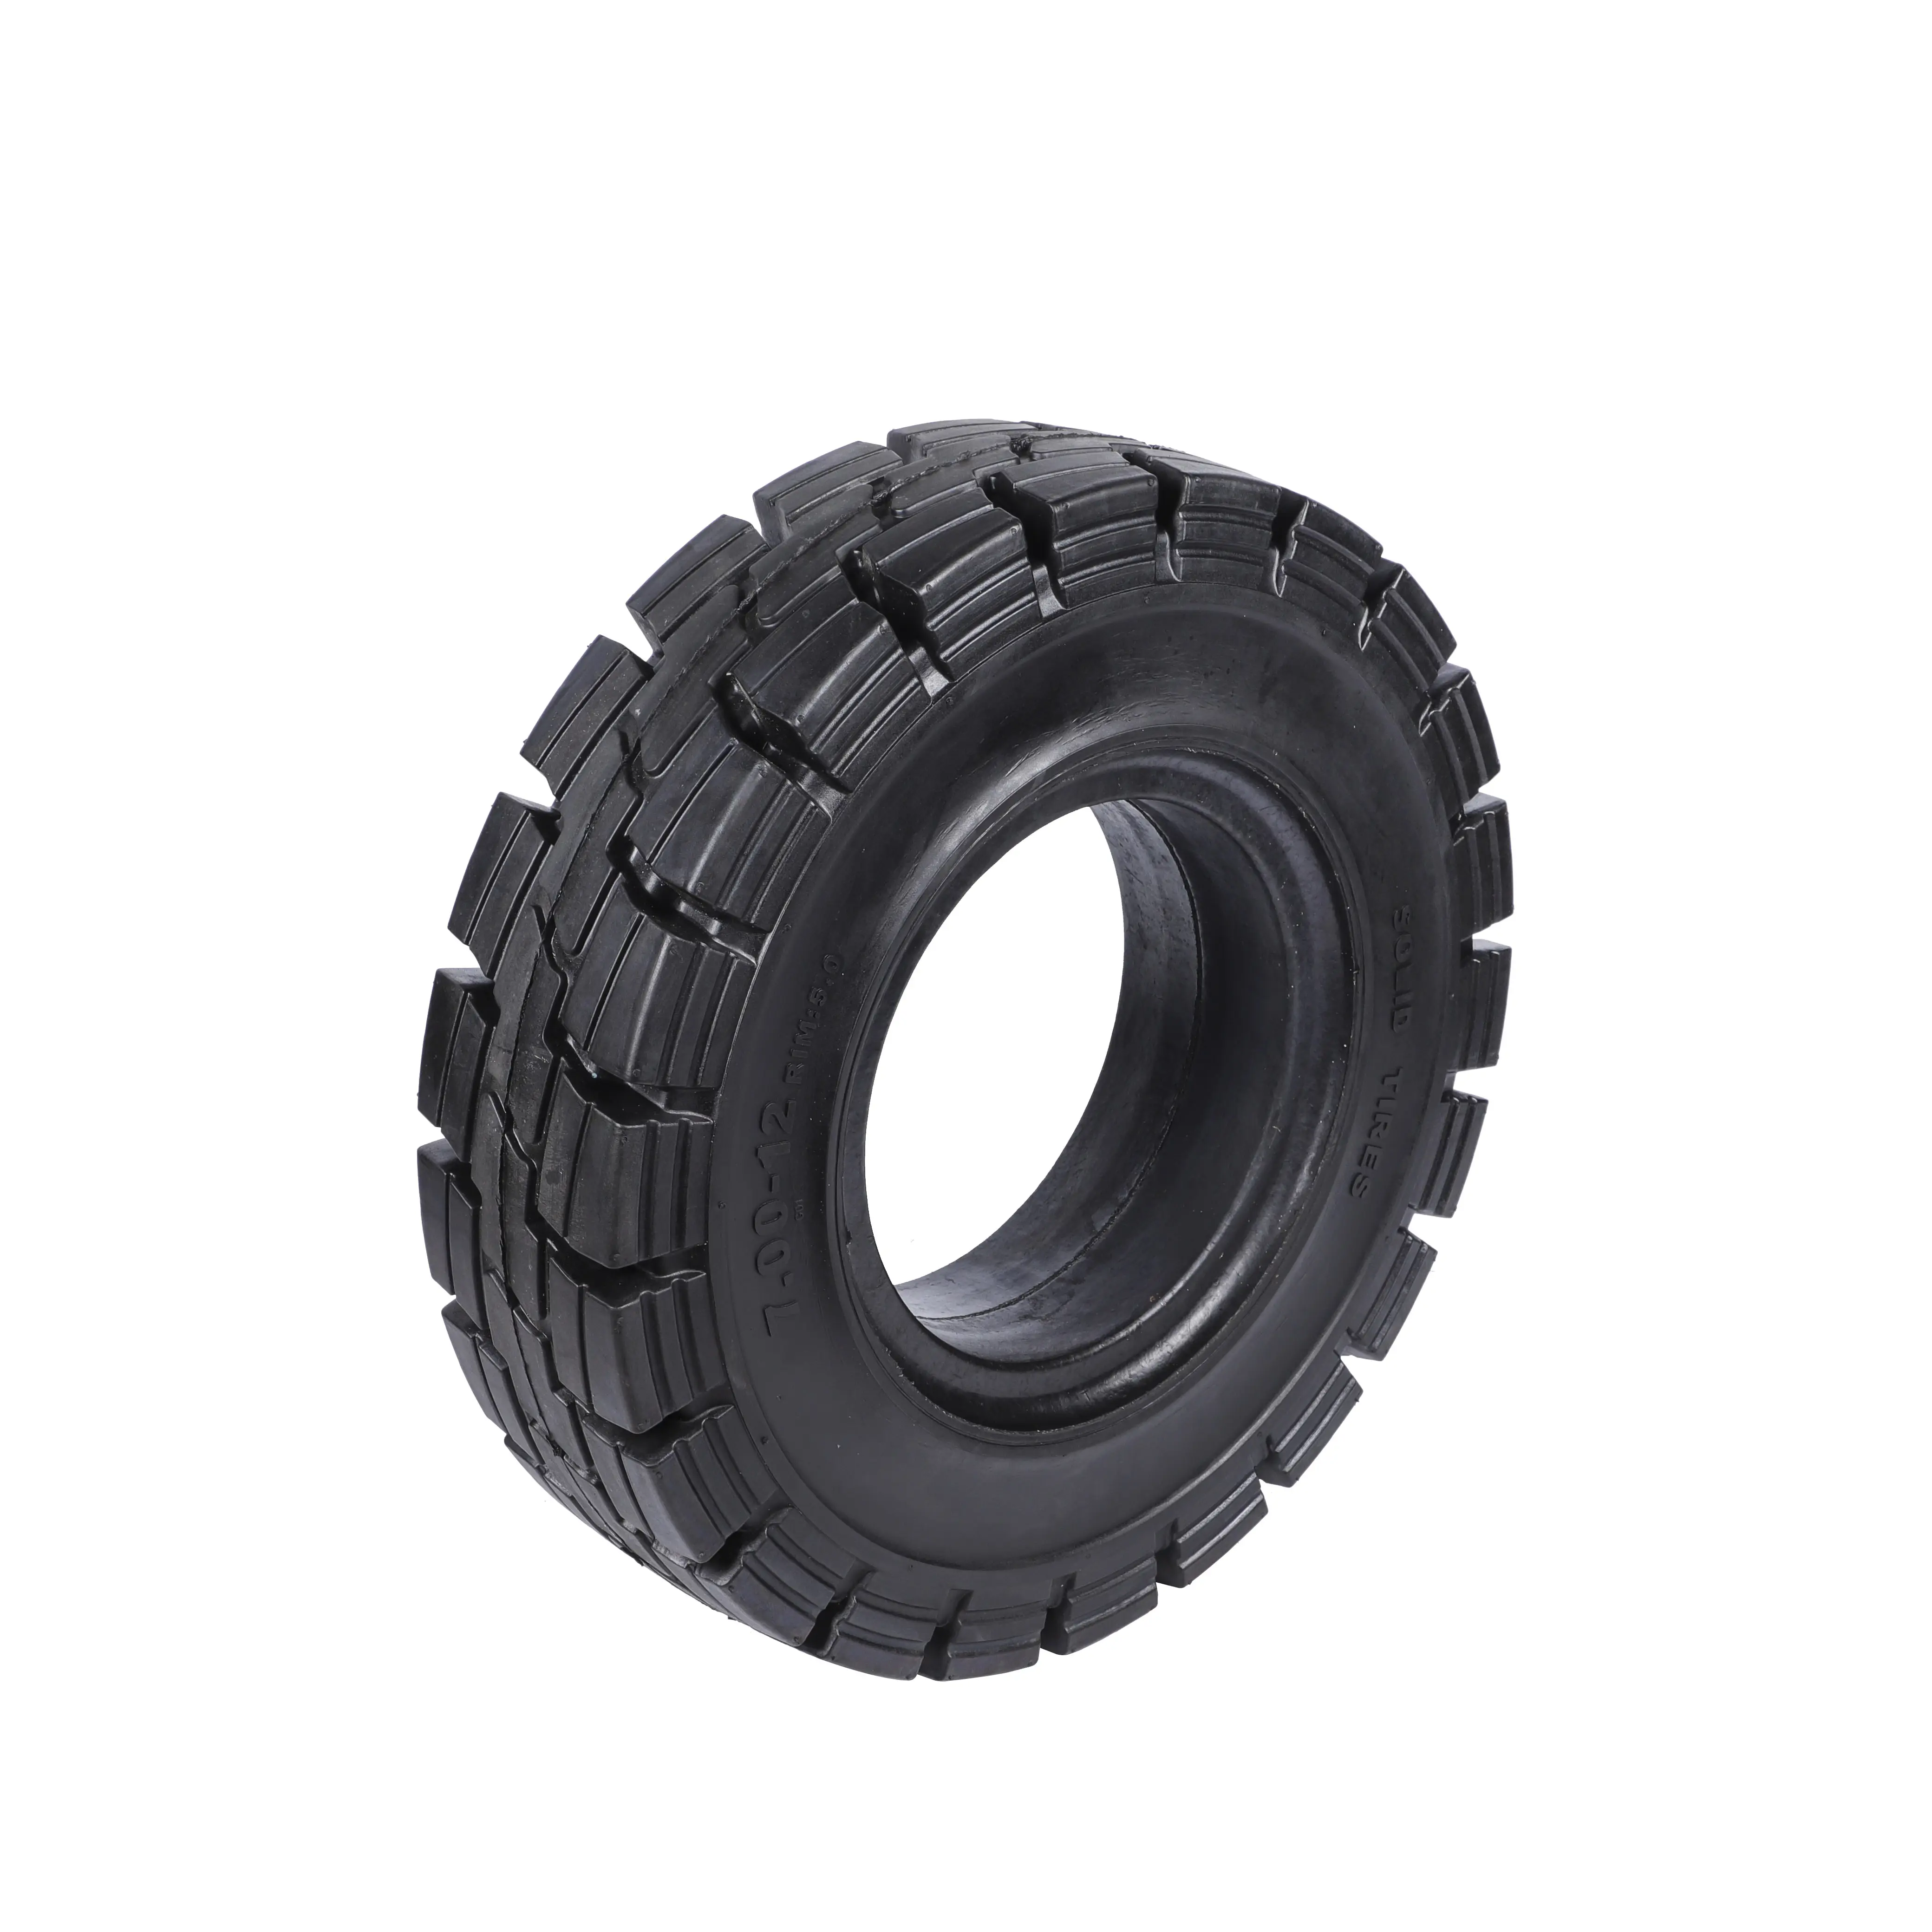 Hot Sail Solid Trailer Tire G7.00-12 Made In China Direct Forklift Tire Industrial Forklift Tire